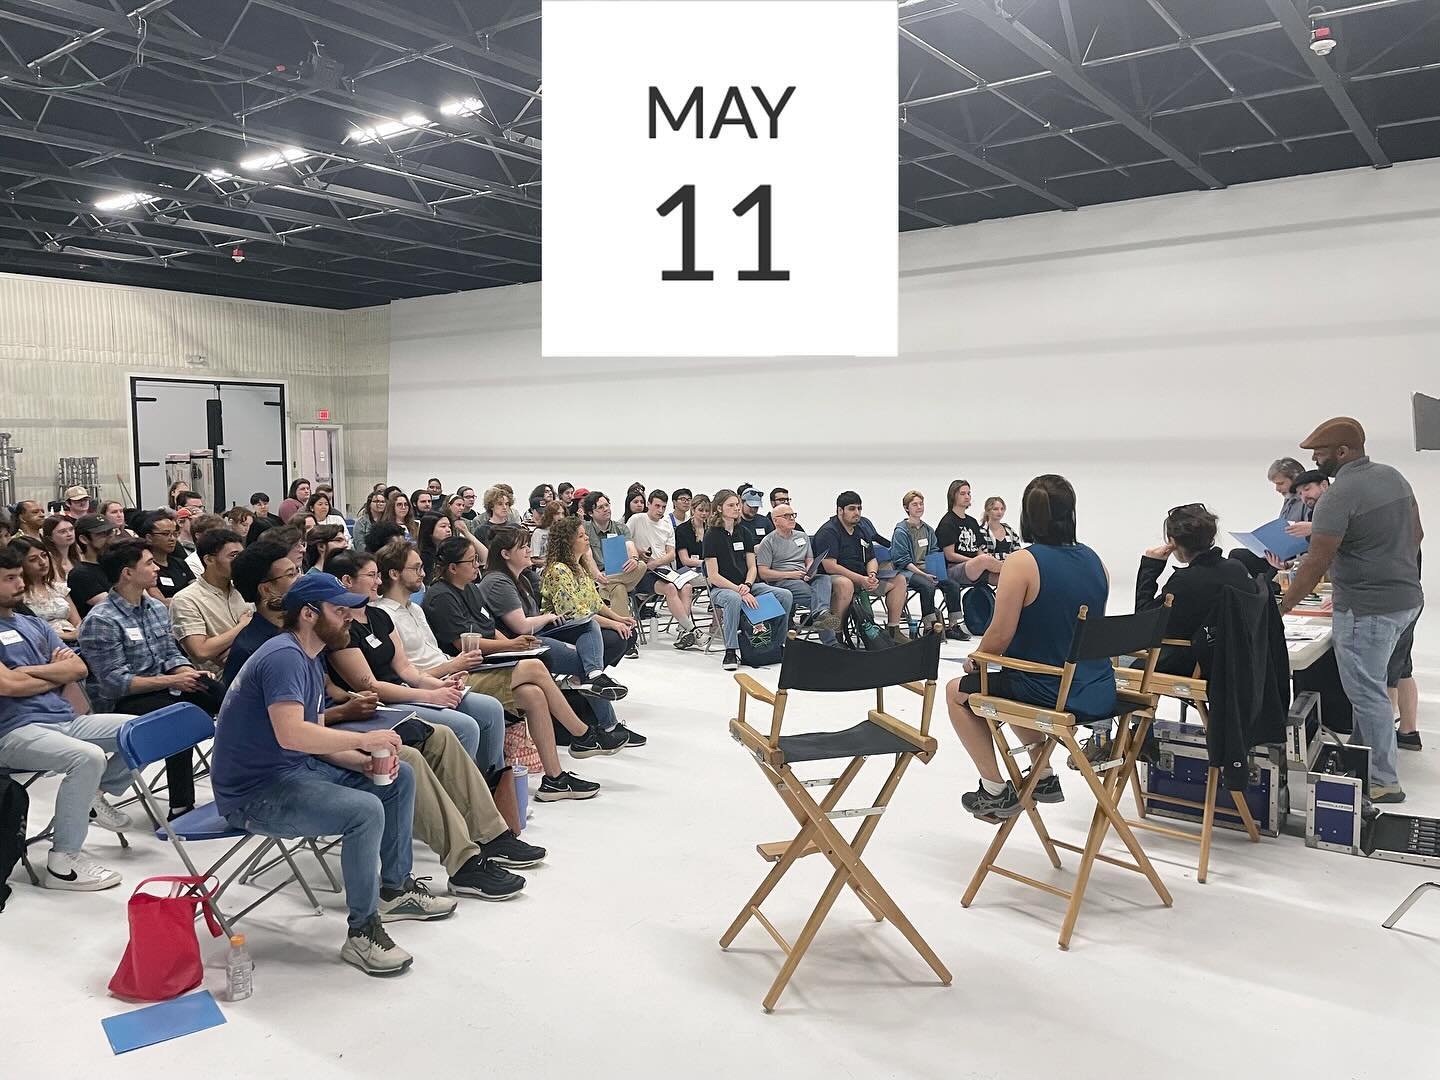 Starting out in the industry? 🎬

Our annual PA Workshop returns this Saturday, May 11th at @RedSky_Studios.

Great opportunity to learn from the best in the business about working on feature film, television, and commercial productions. 

Breakout s